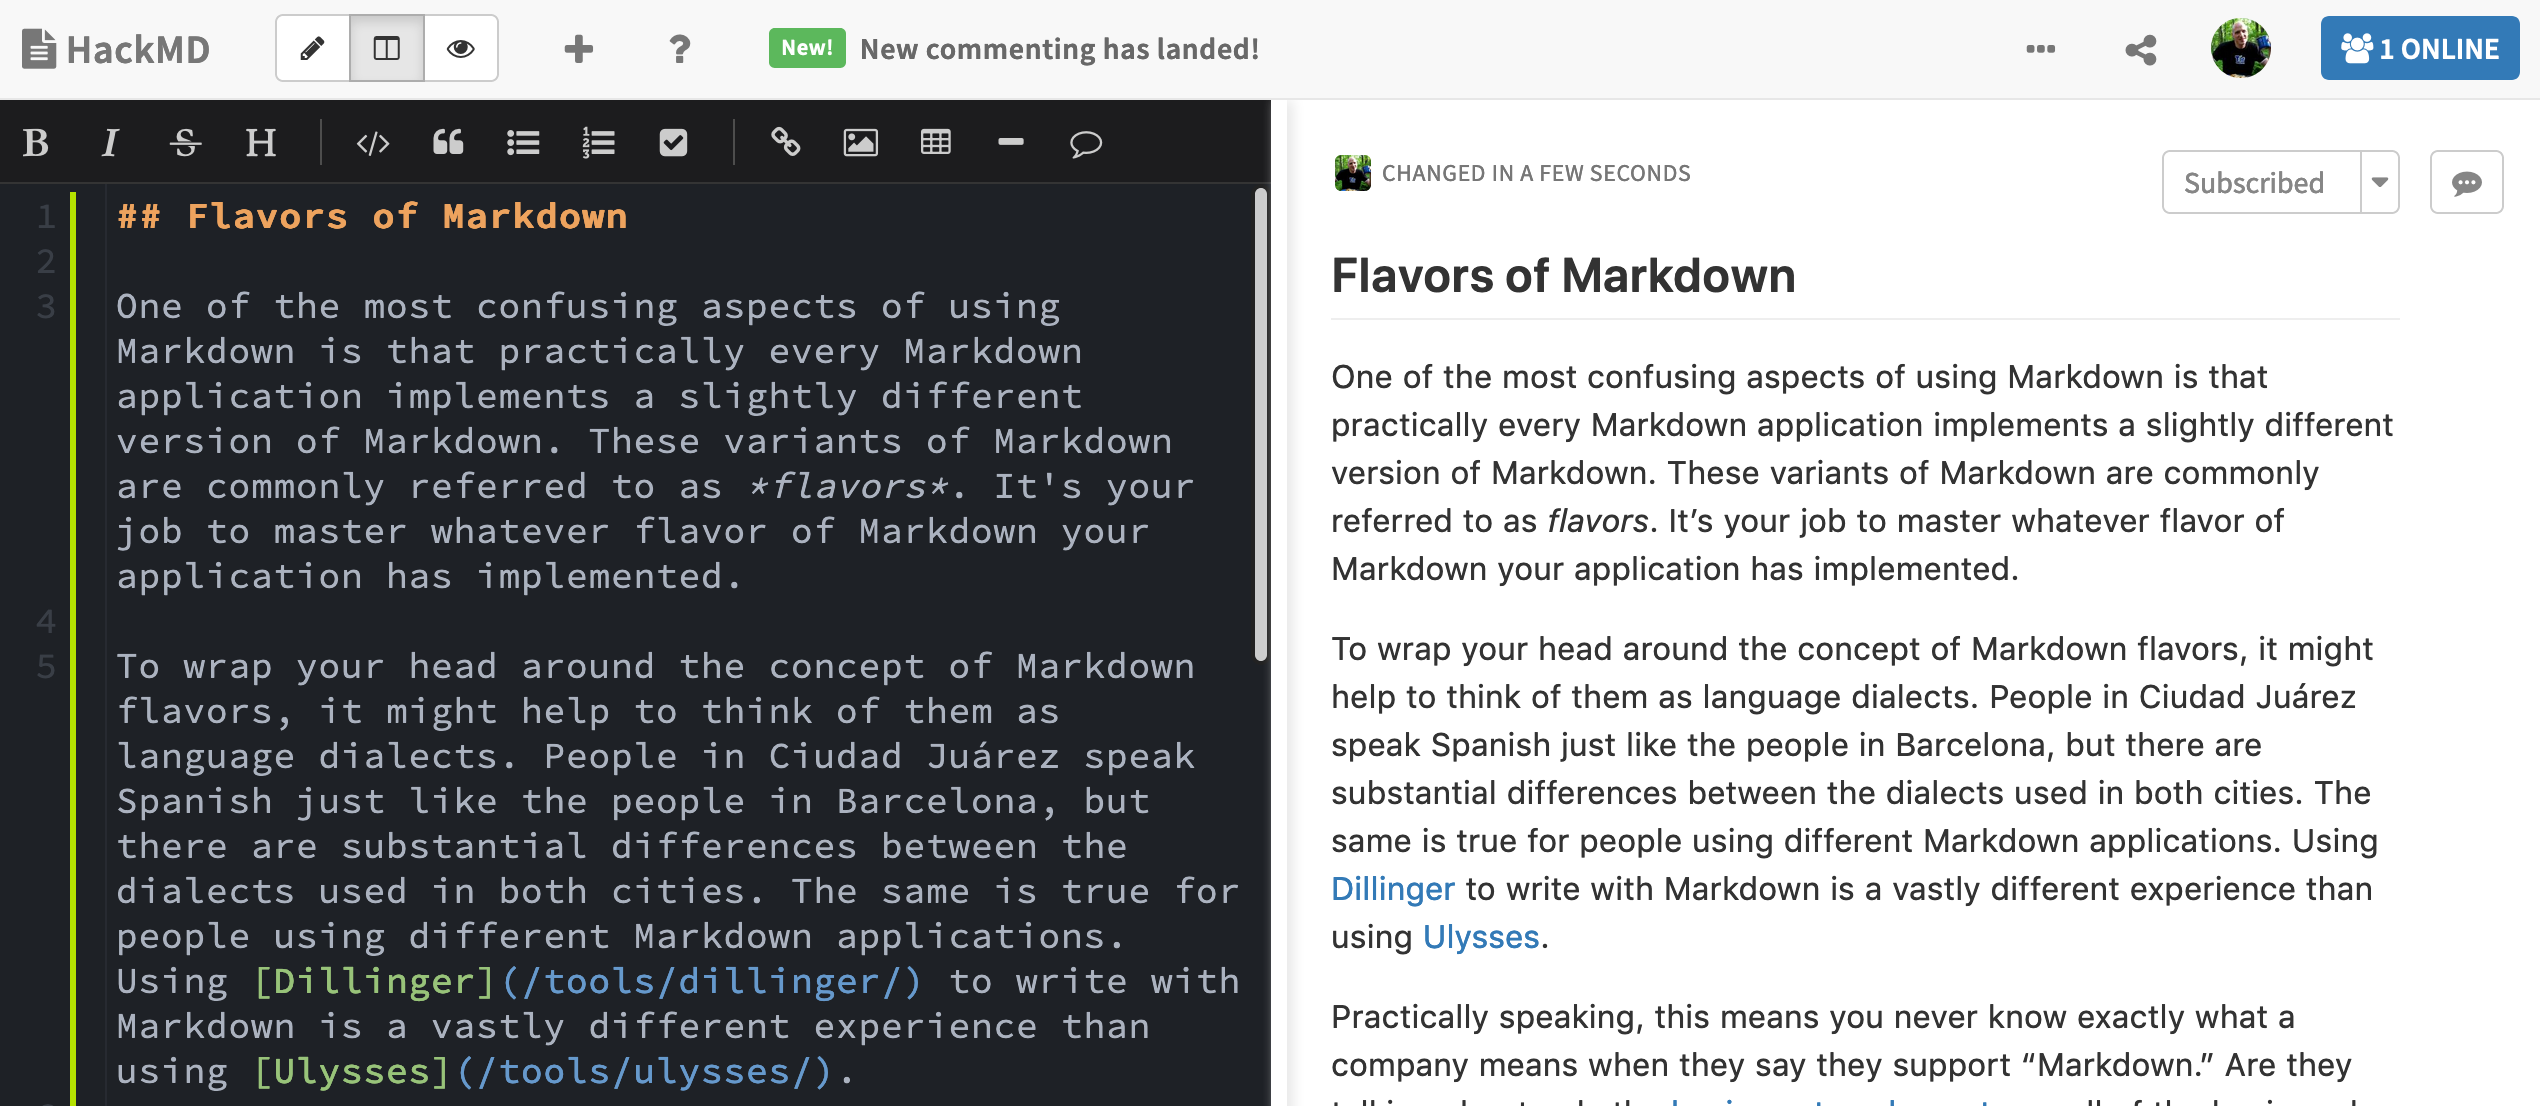 The HackMD Markdown interface